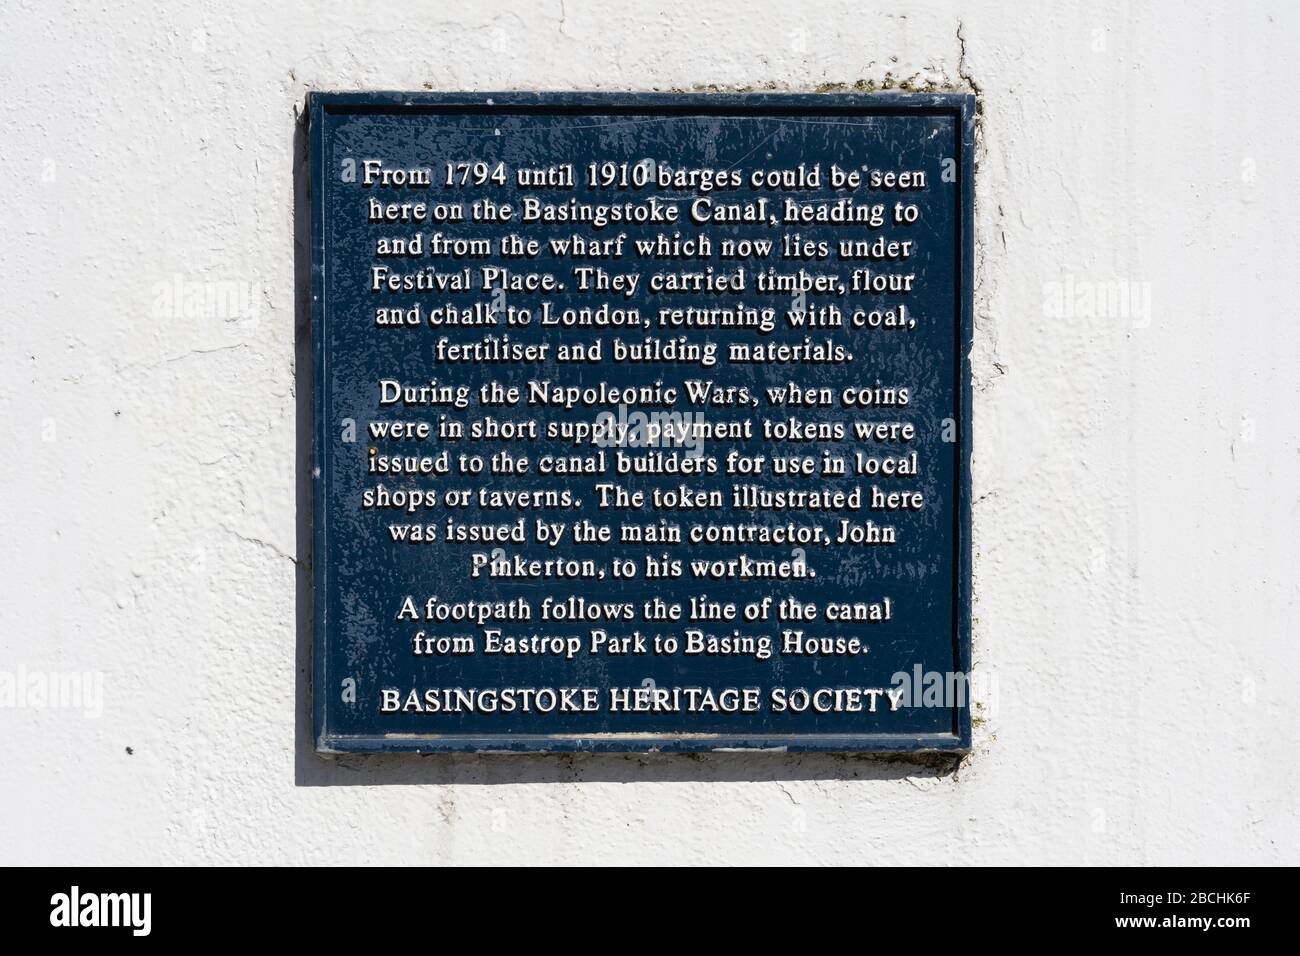 A plaque describing offloading of barges on Basingstoke canal in the past - Basingstoke Heritage Society, UK. The Basingstoke section has been lost Stock Photo